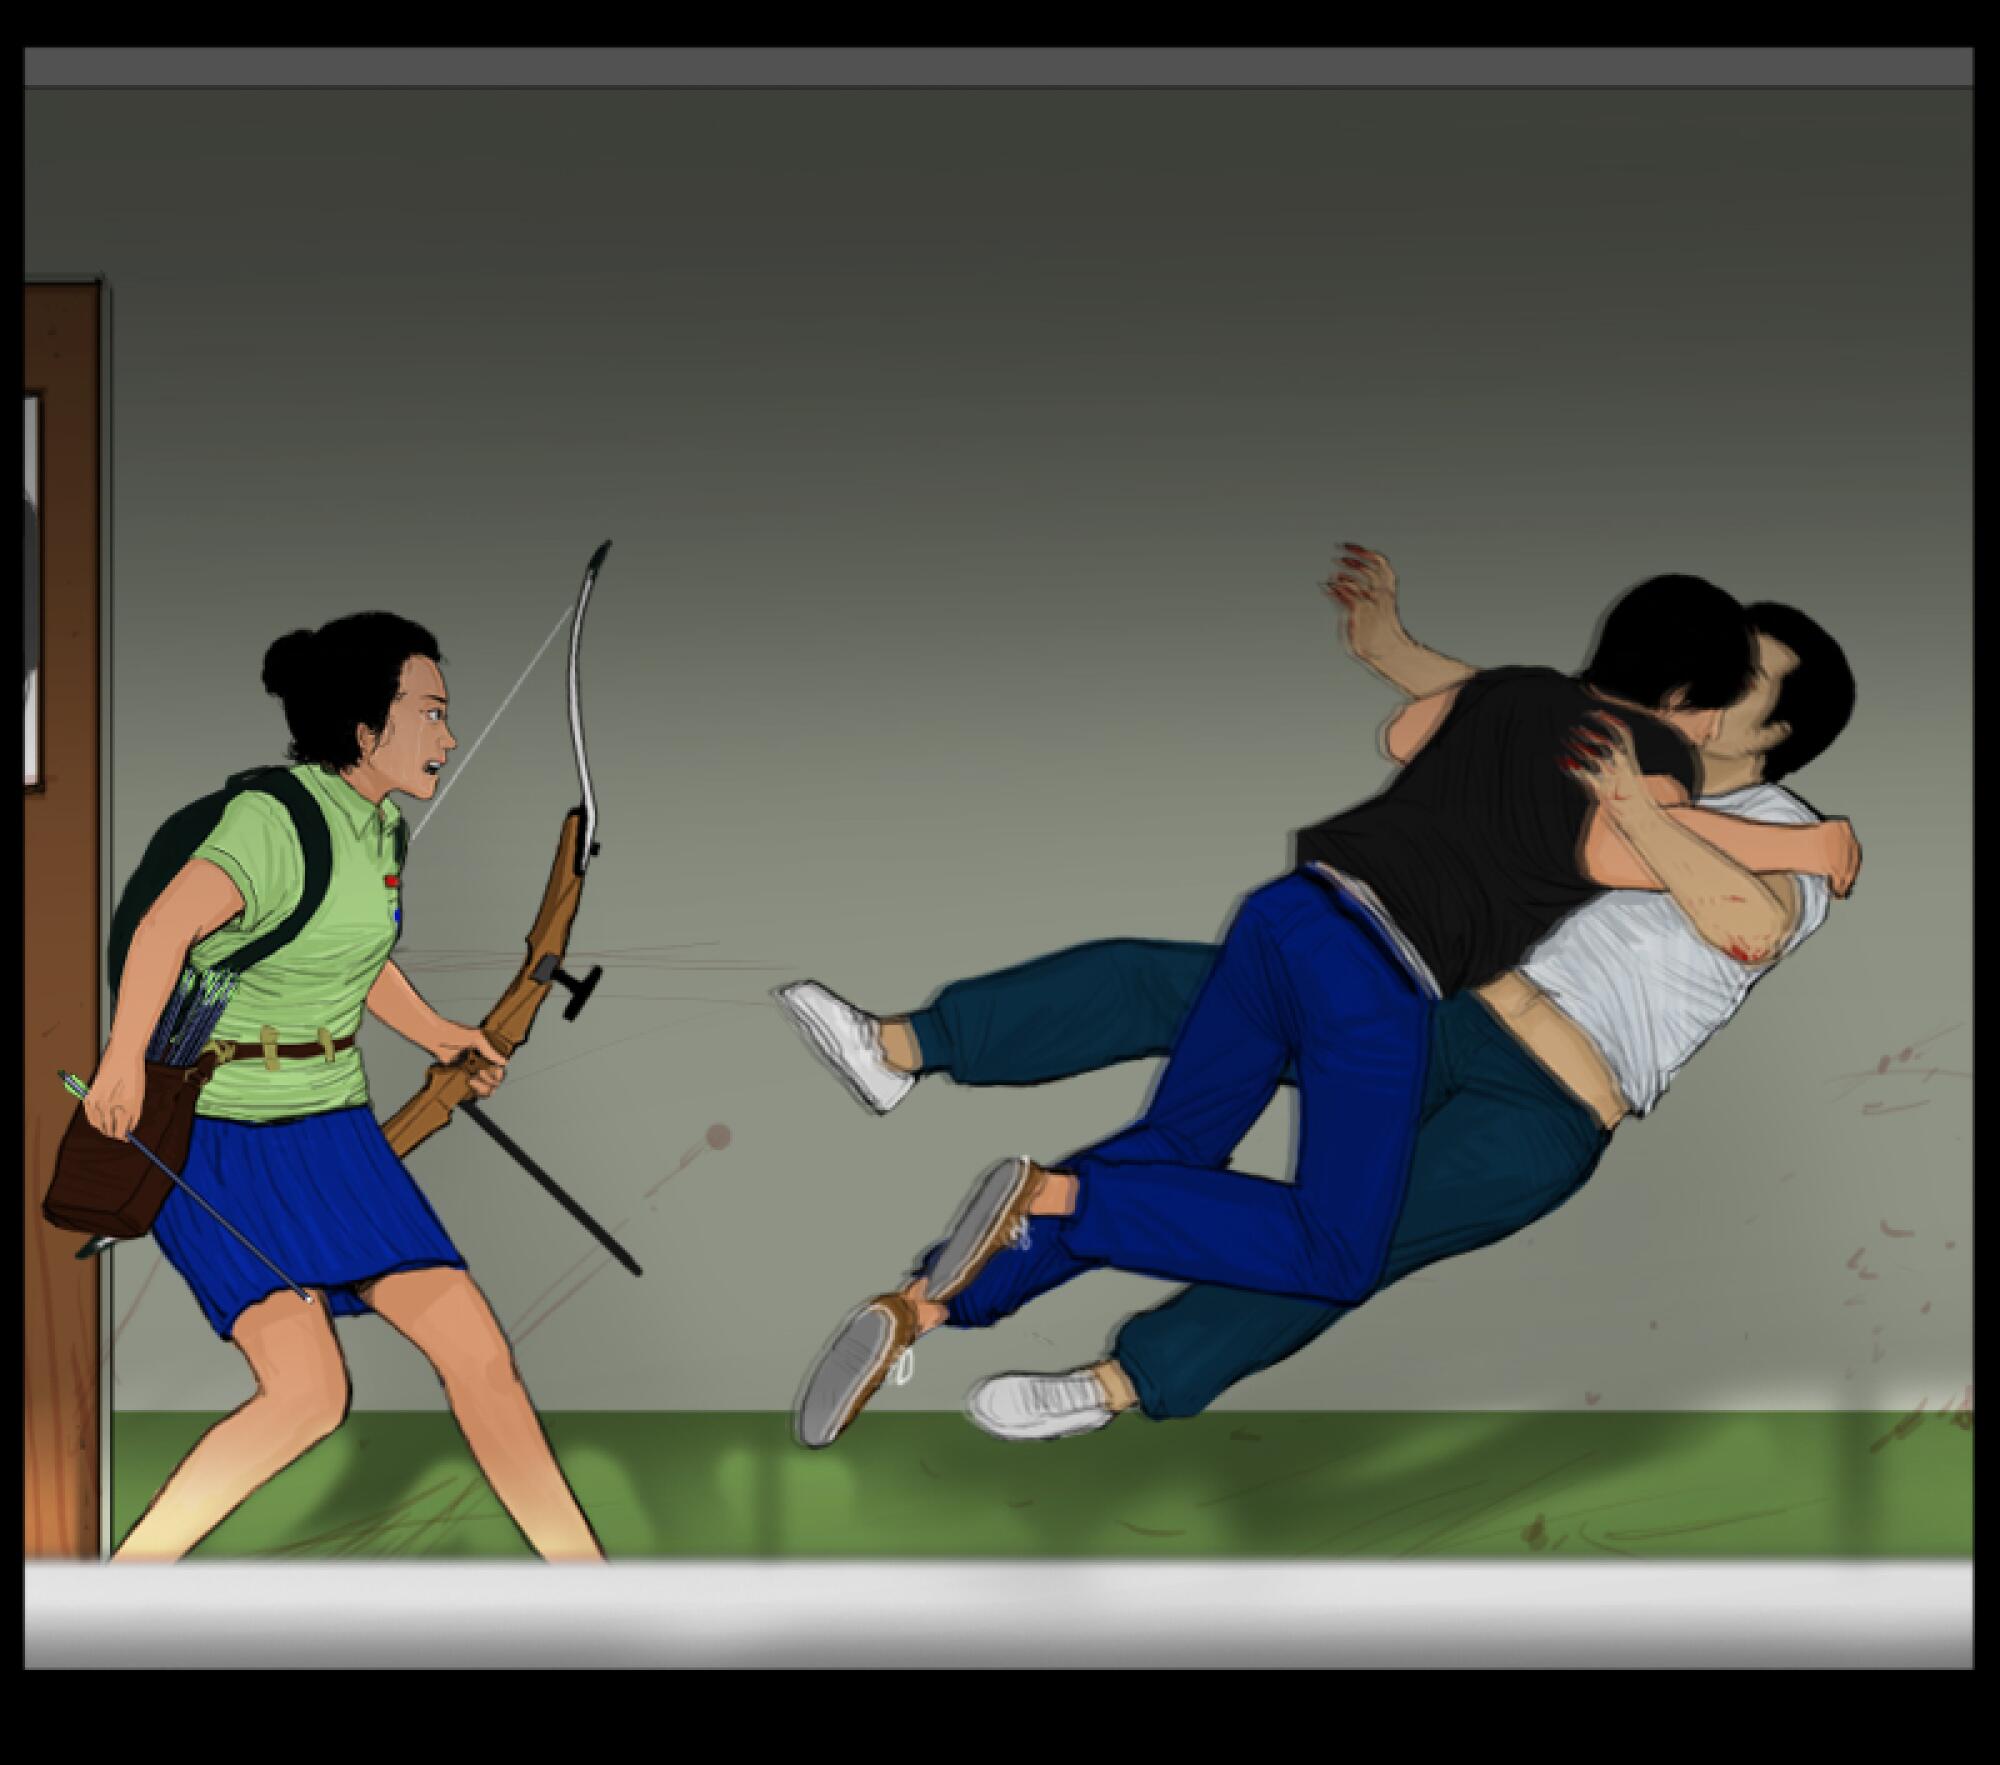 A frame from a web comic shows a person with a bow and arrow next to a zombie attacking another person